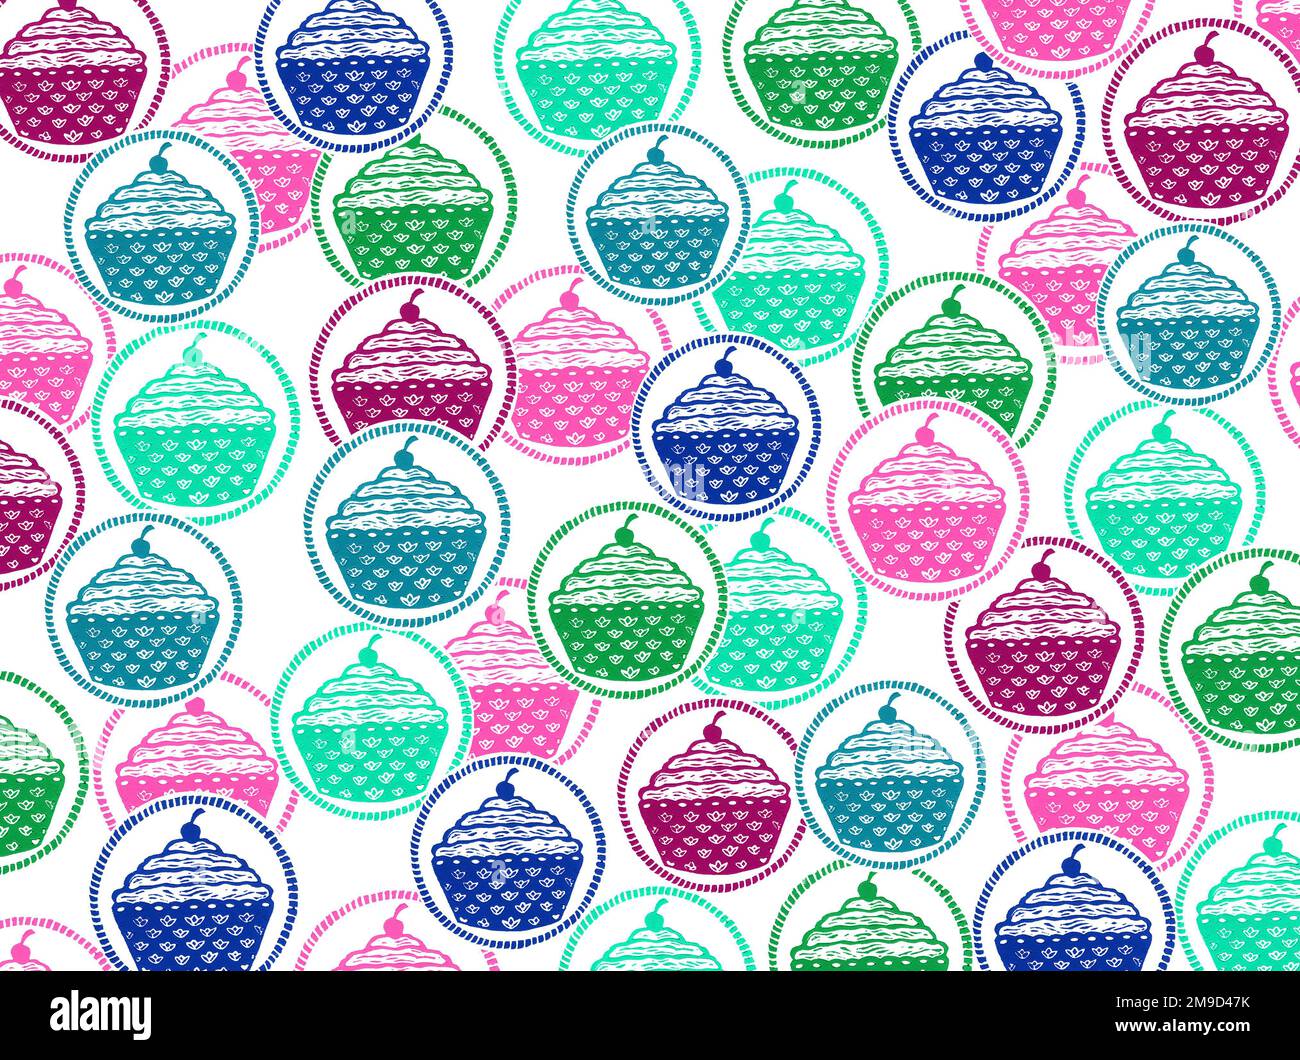 Colourful cupcakes pattern Stock Photo